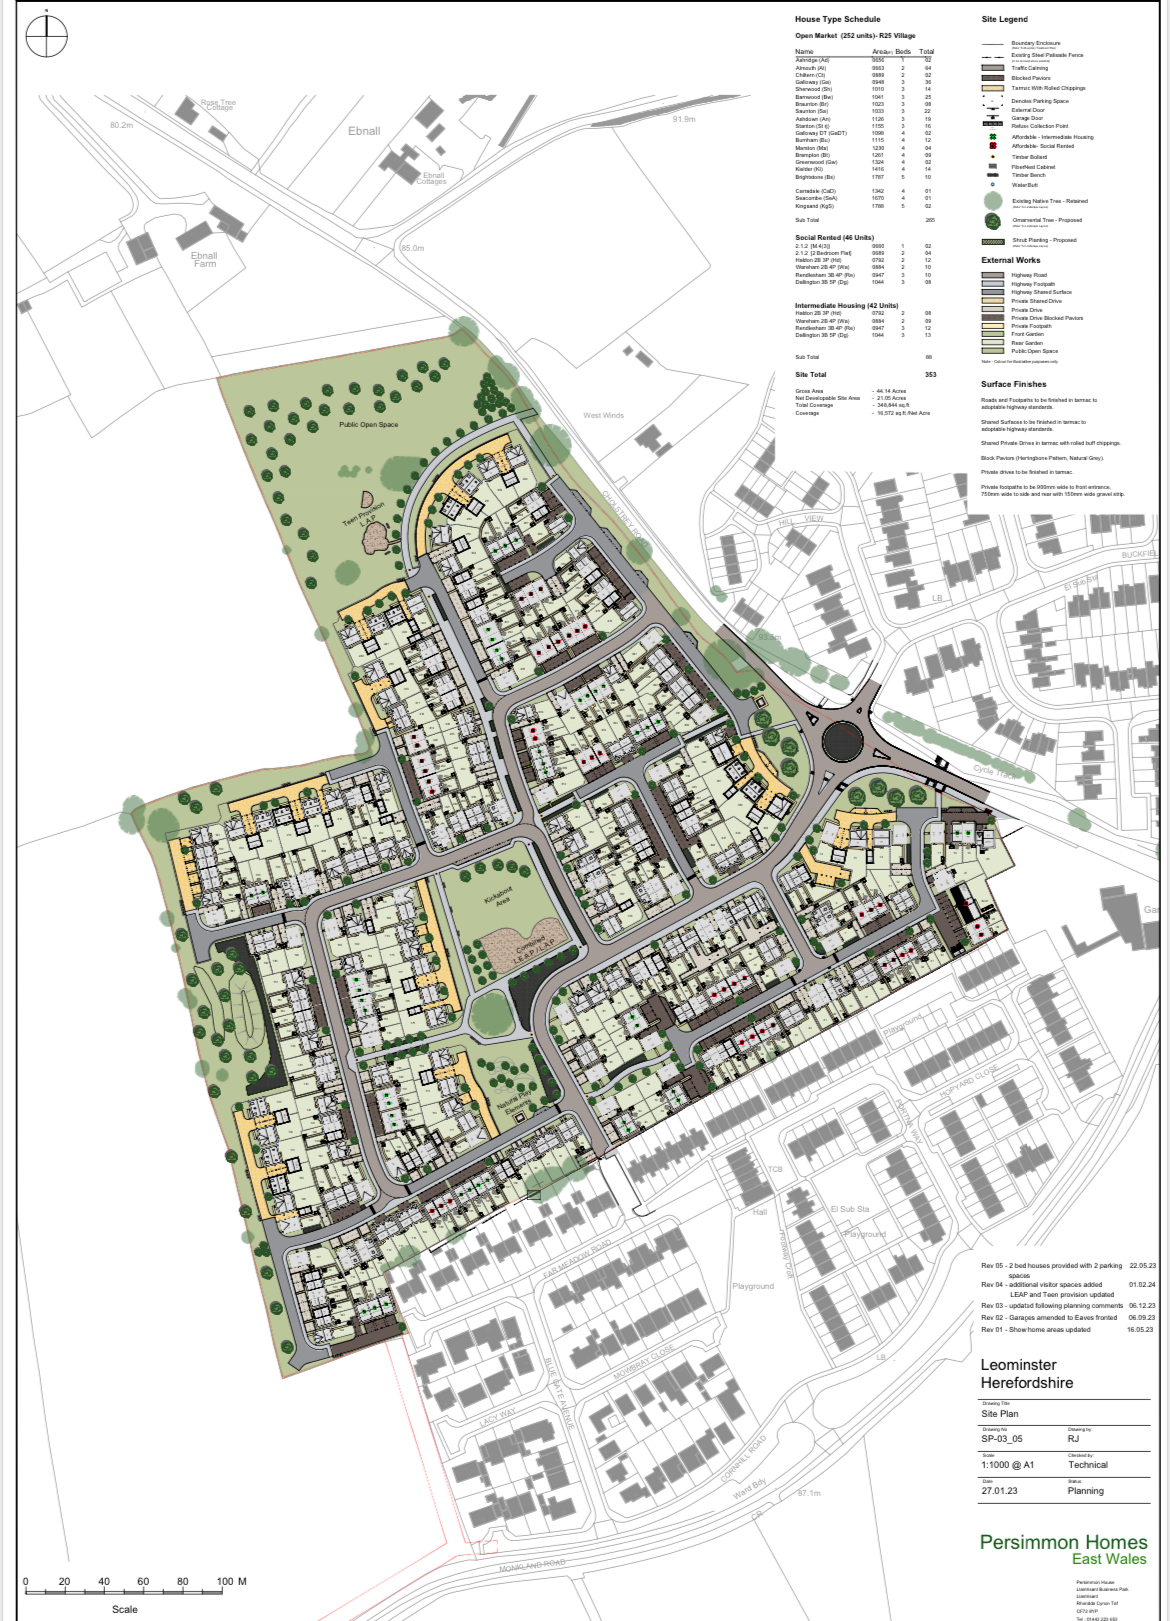 NEWS | Herefordshire Council officers approve plans for 353 new homes to be built by Persimmon Homes in Leominster